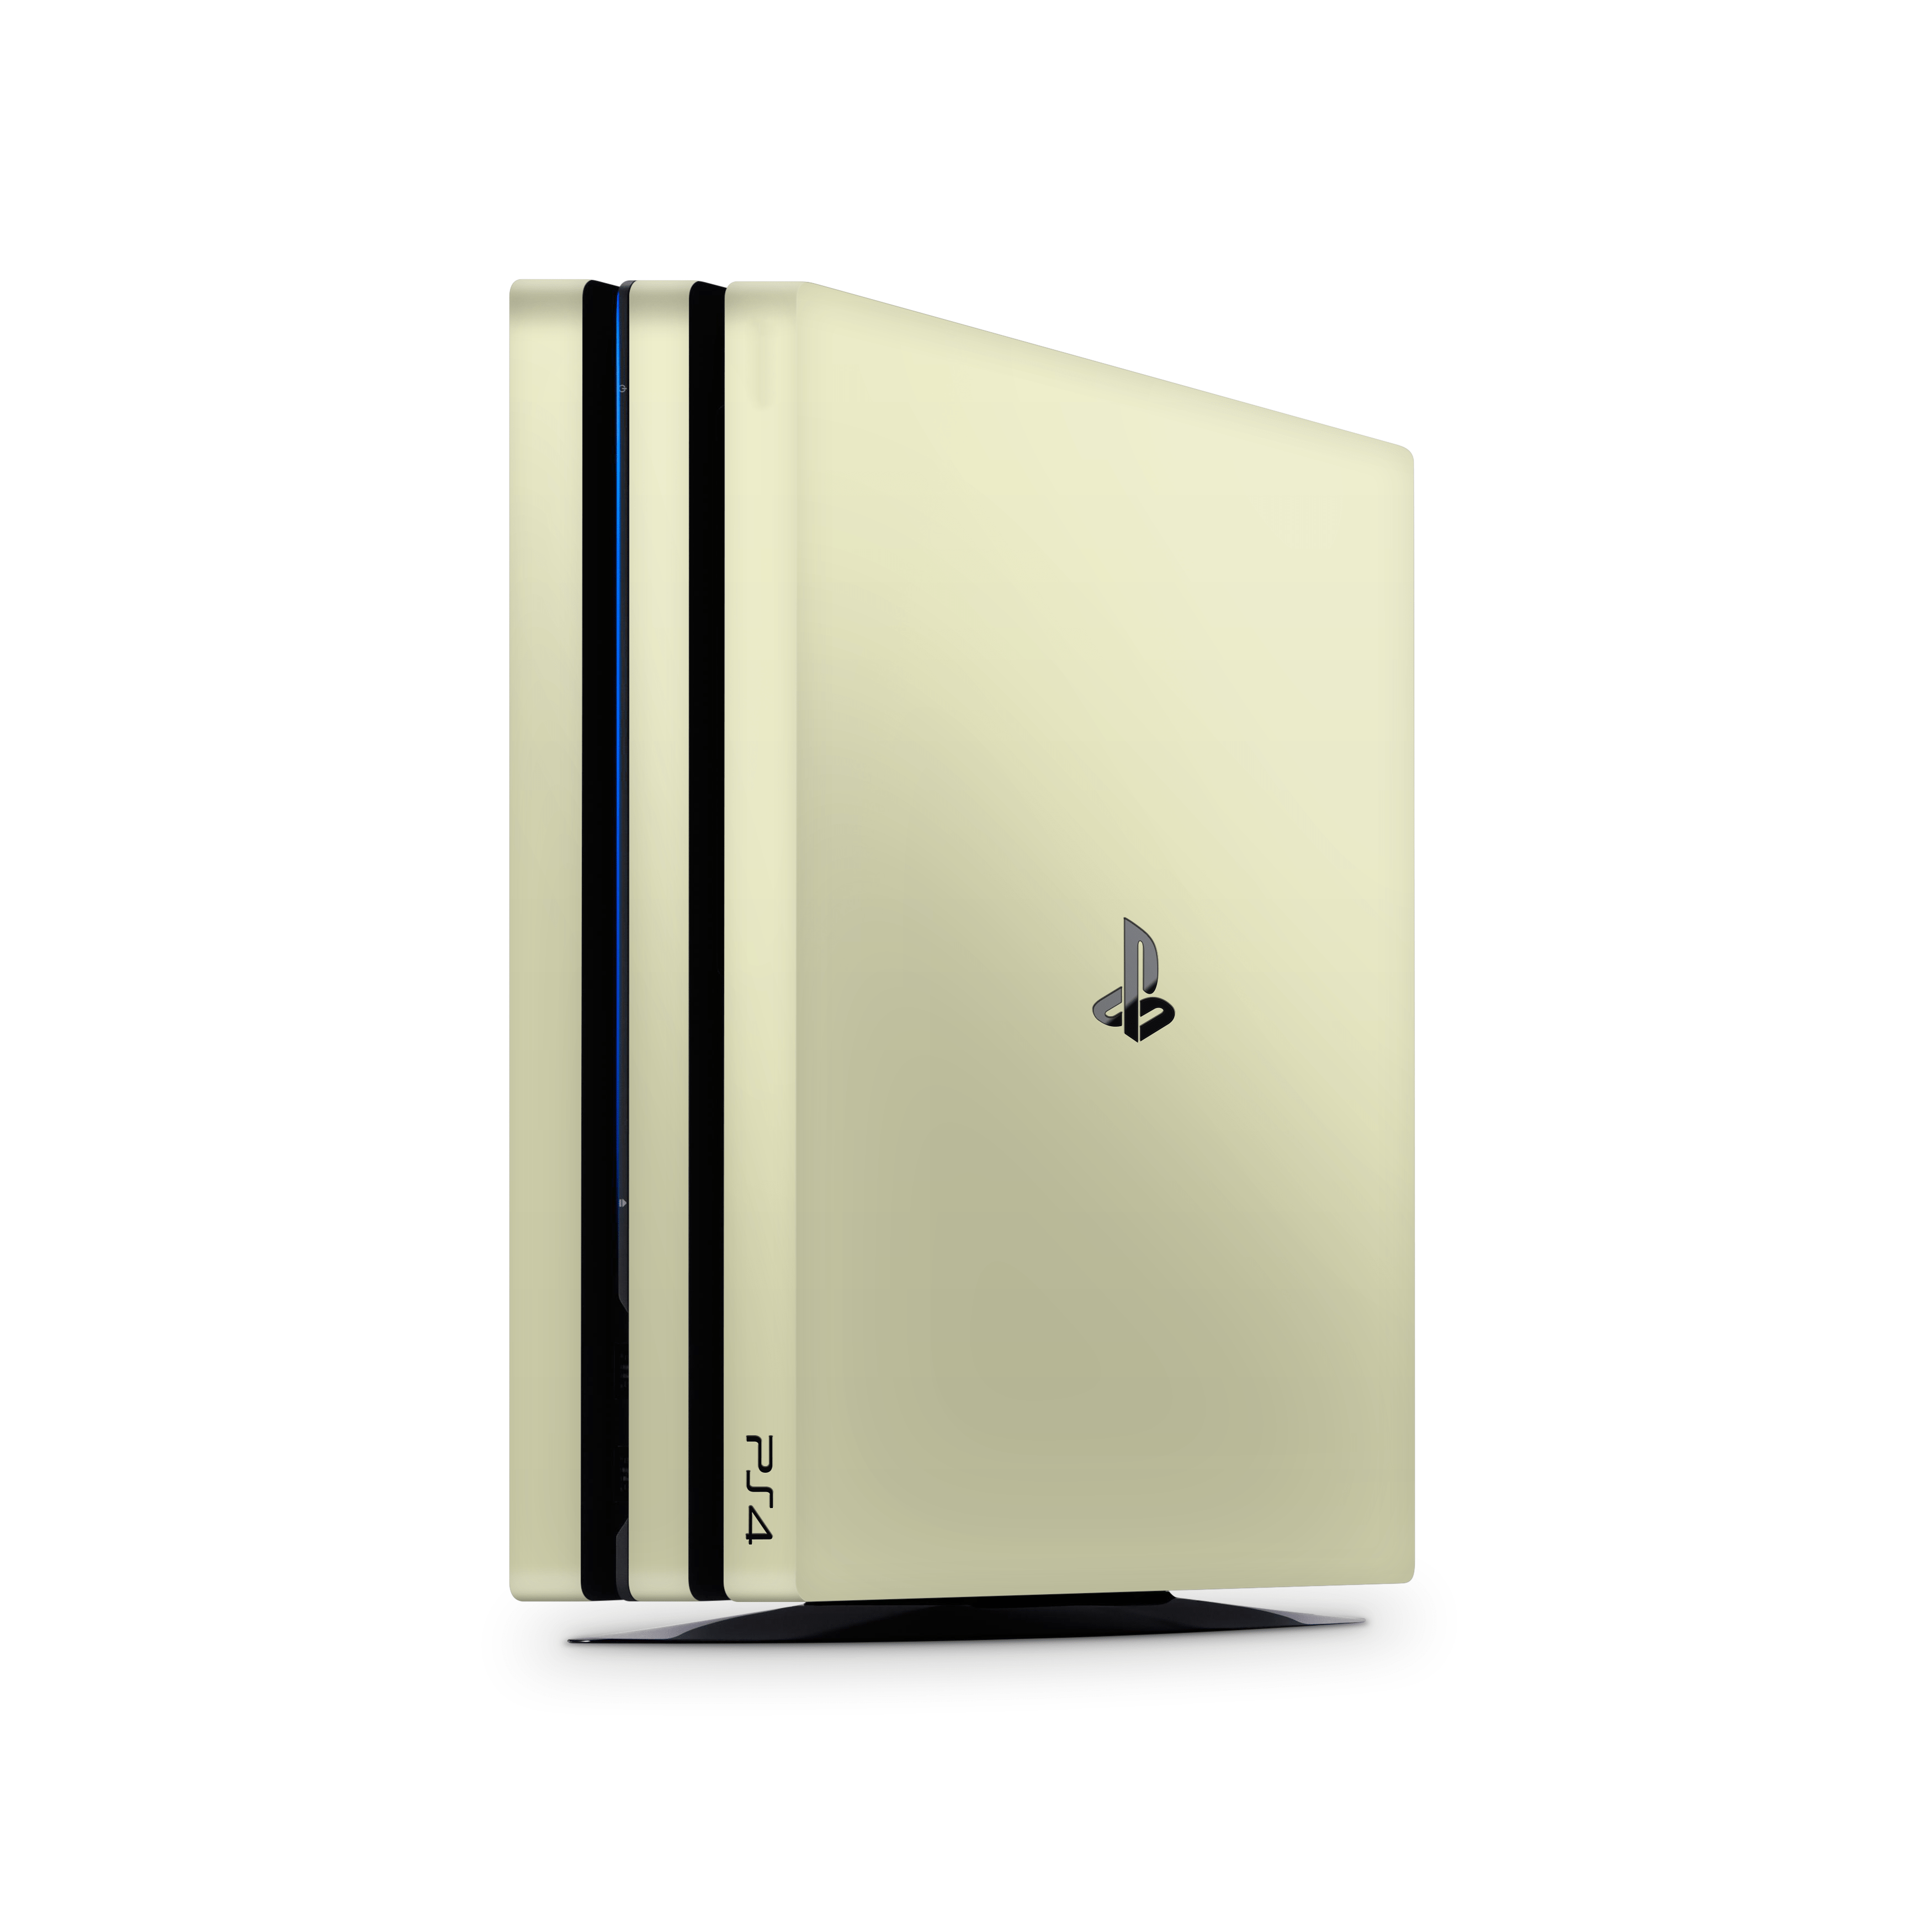 Eggy Yellow PS4 | PS4 Pro | PS4 Slim Skins